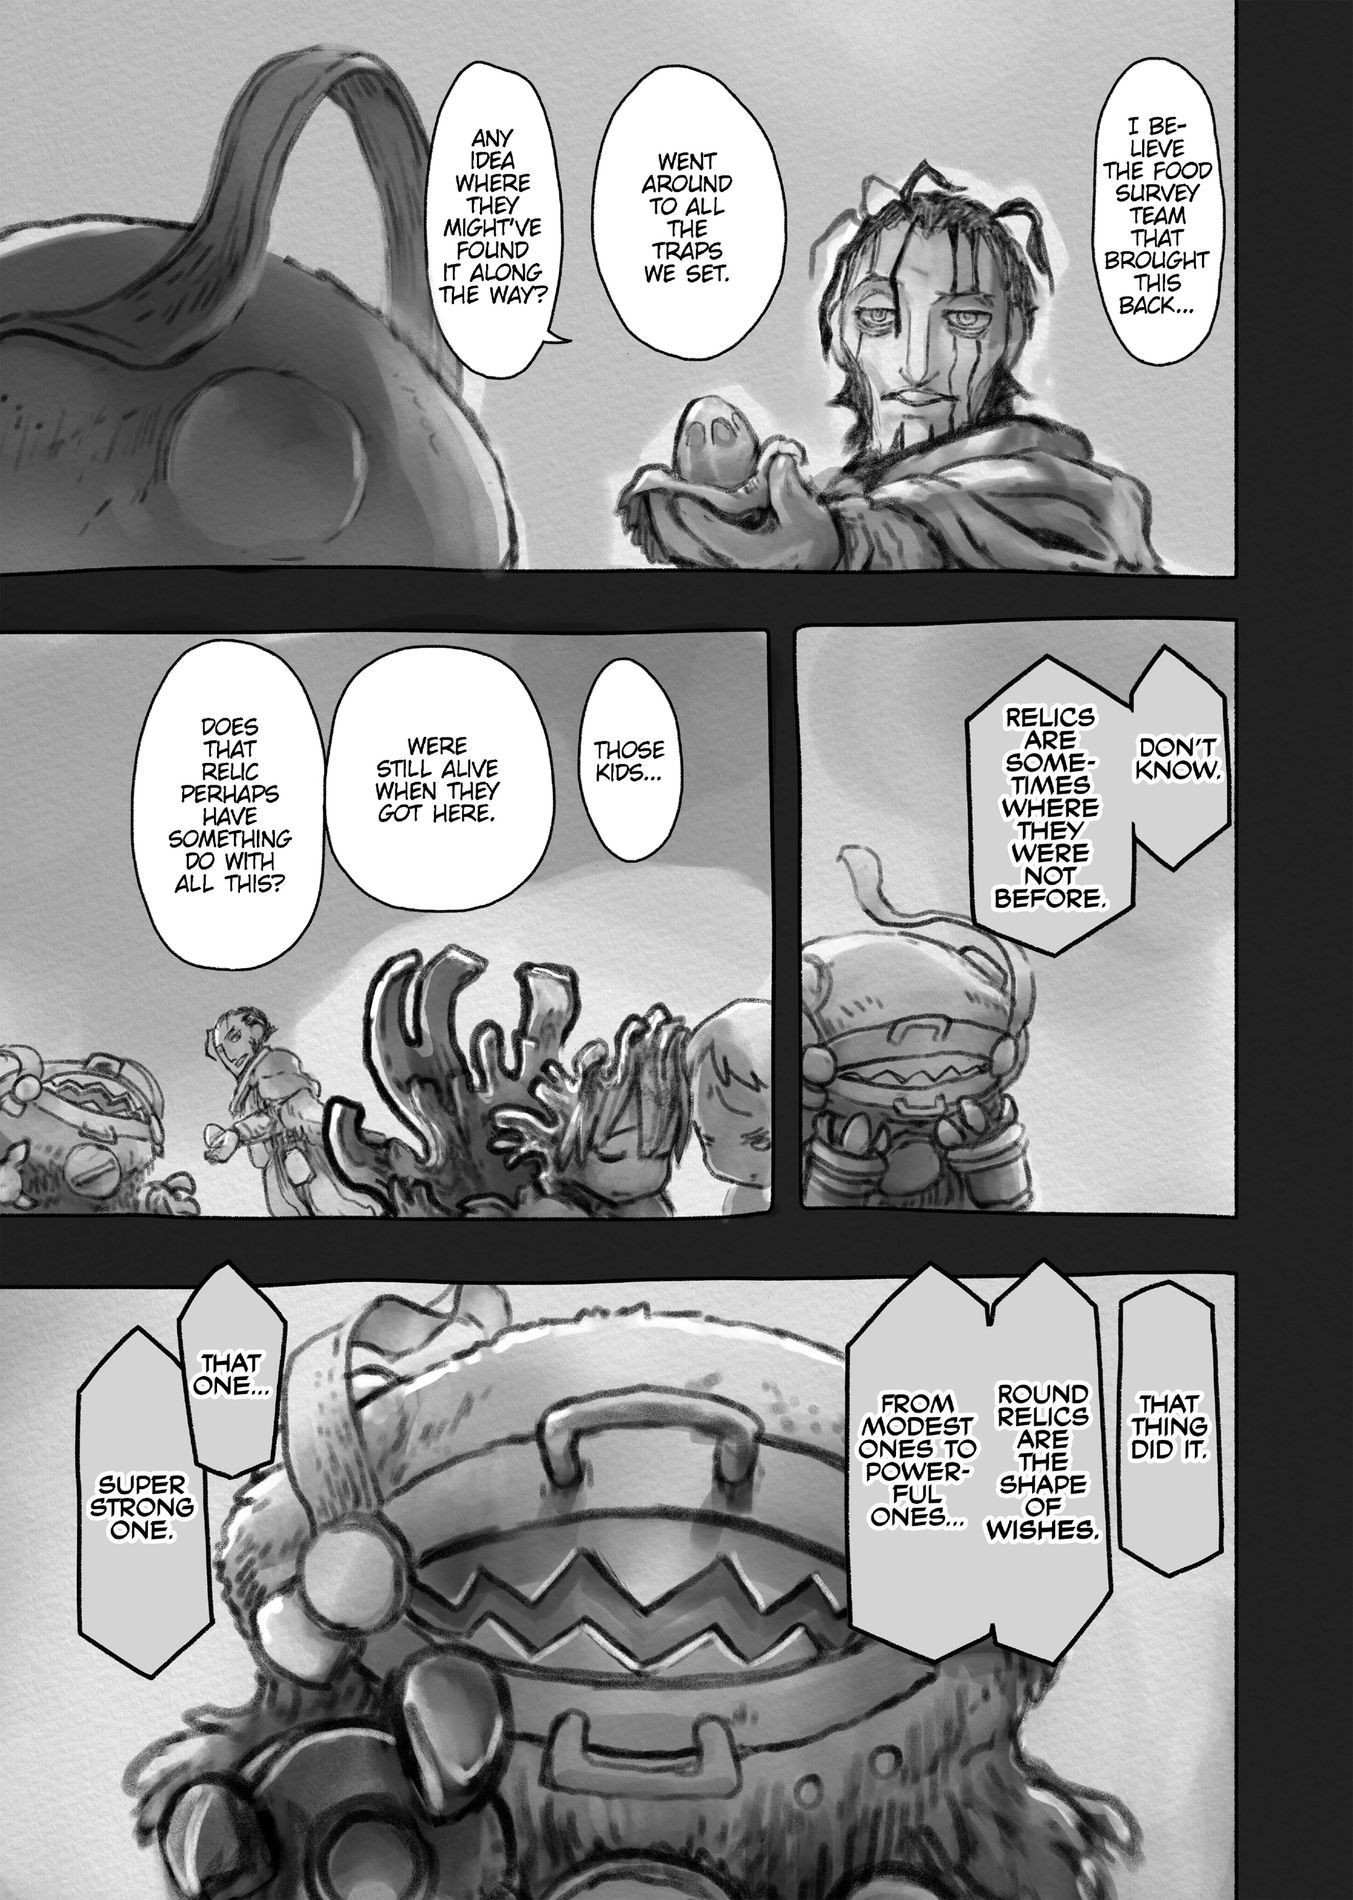 Made in Abyss Chapter 063, Made in Abyss Wiki